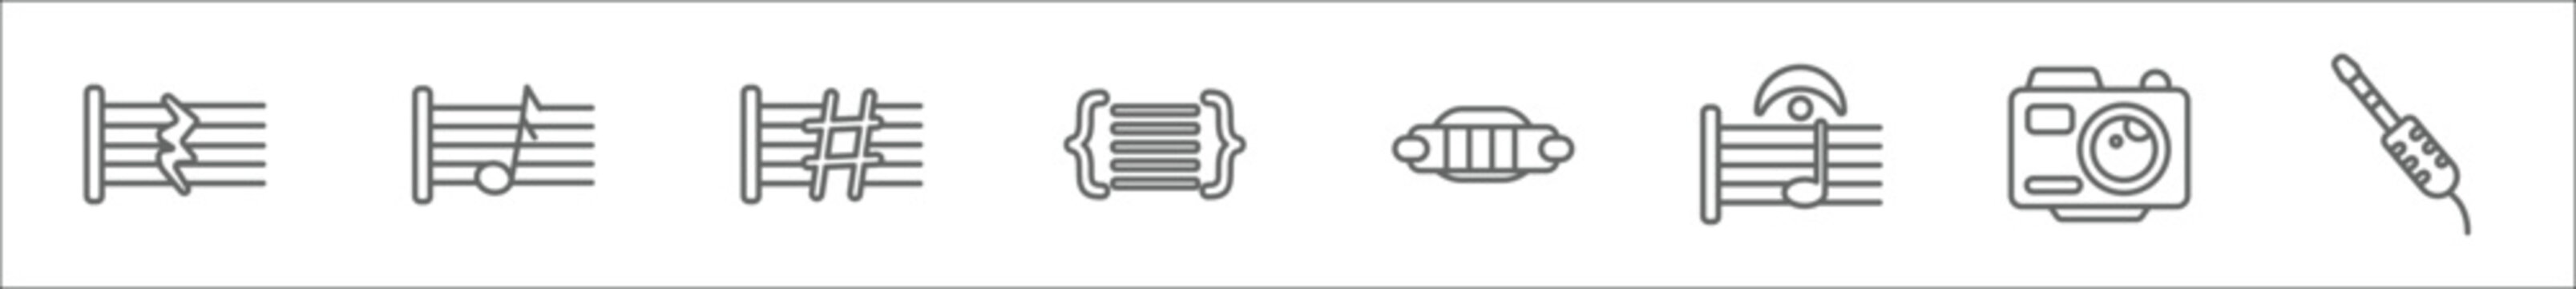 outline set of music line icons. linear vector icons such as quarter note rest, semiquaver, sharp, bracket, harmonica, fermata, photo camera, jack connector